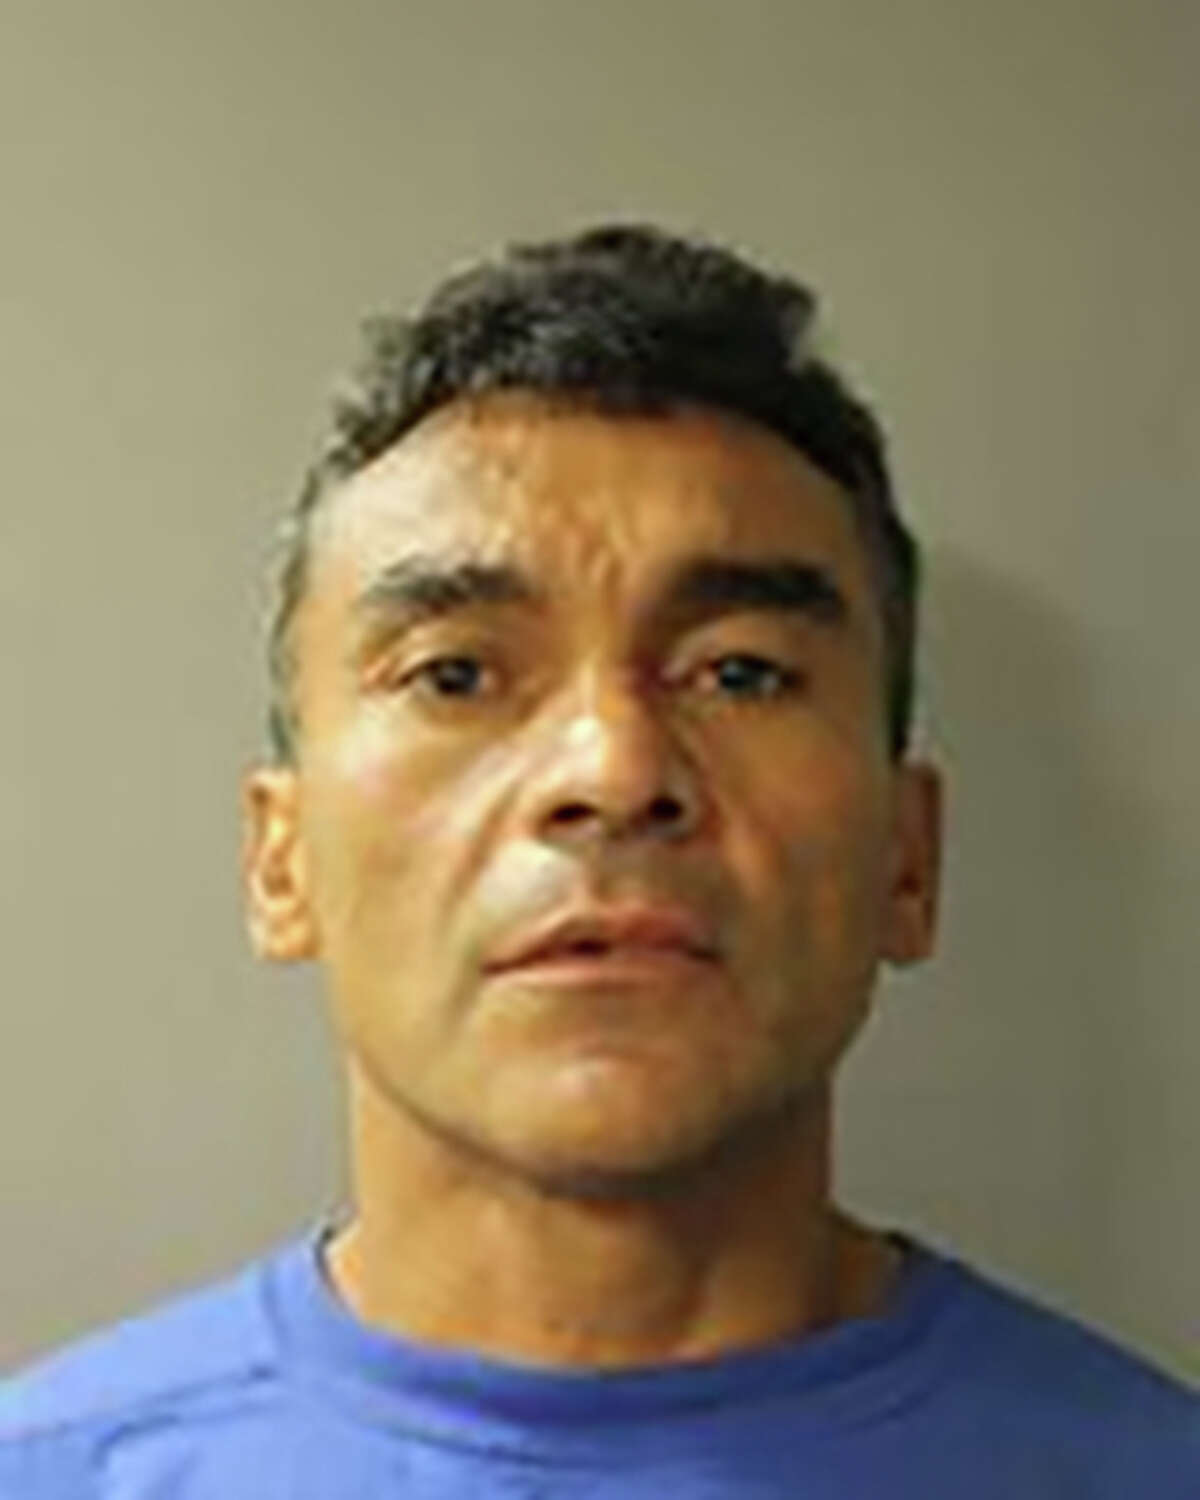 Ramon Escobar, 47, was questioned in his aunt and uncle’s disappearance in Houston before coming to California, where he is now accused of beating three men to death in Los Angeles and Santa Monica.